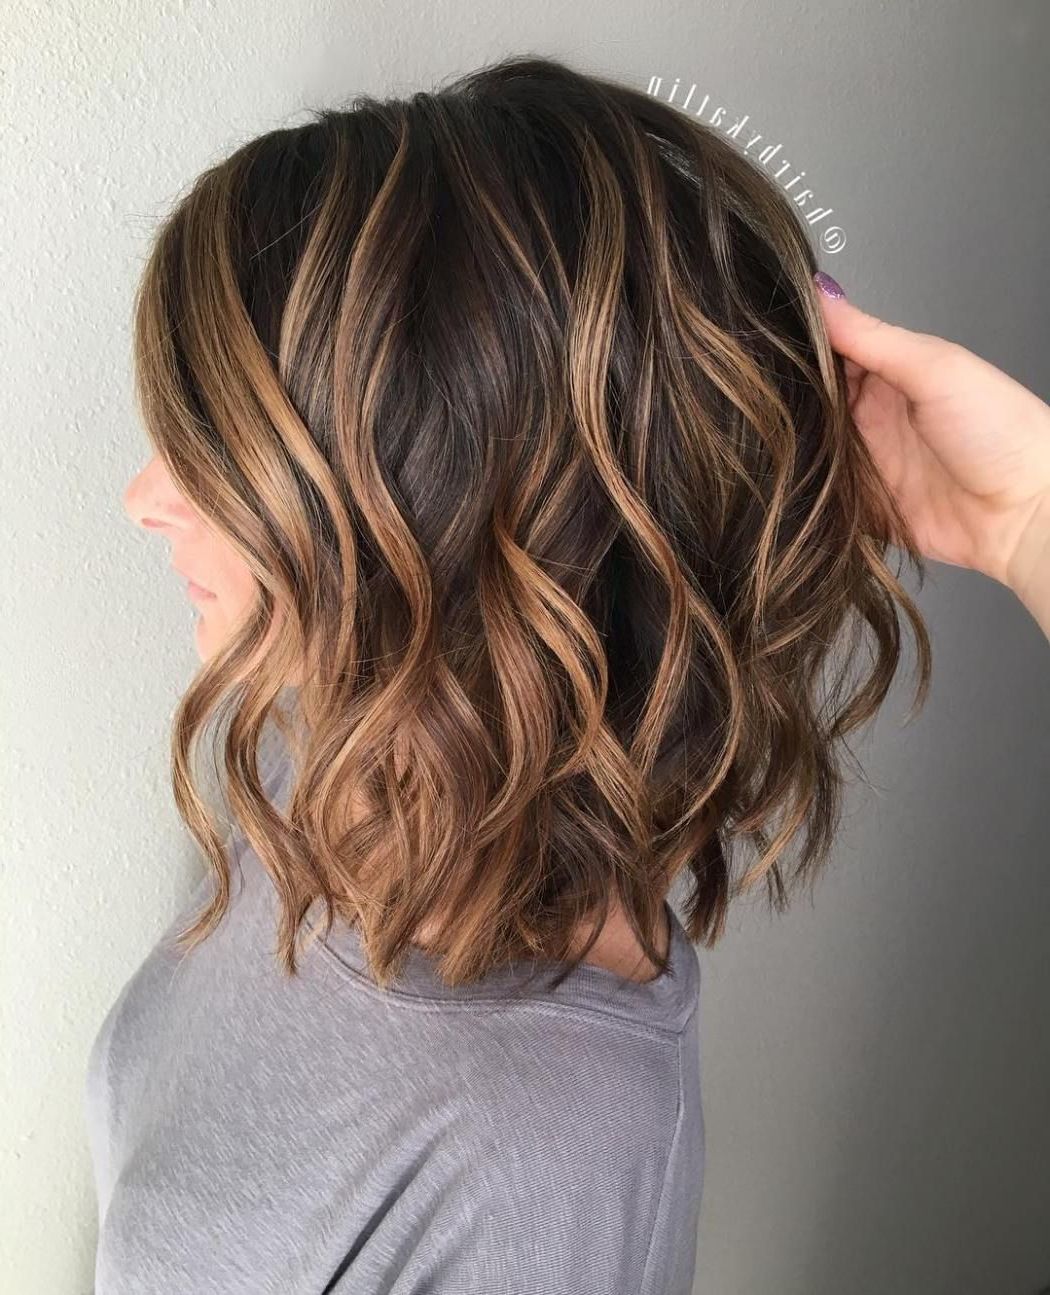 Most Up To Date Painted Golden Highlights On Brunette Curls Hairstyles Within Image Result For Caramel Highlights On Dark Brown Curly (View 19 of 20)